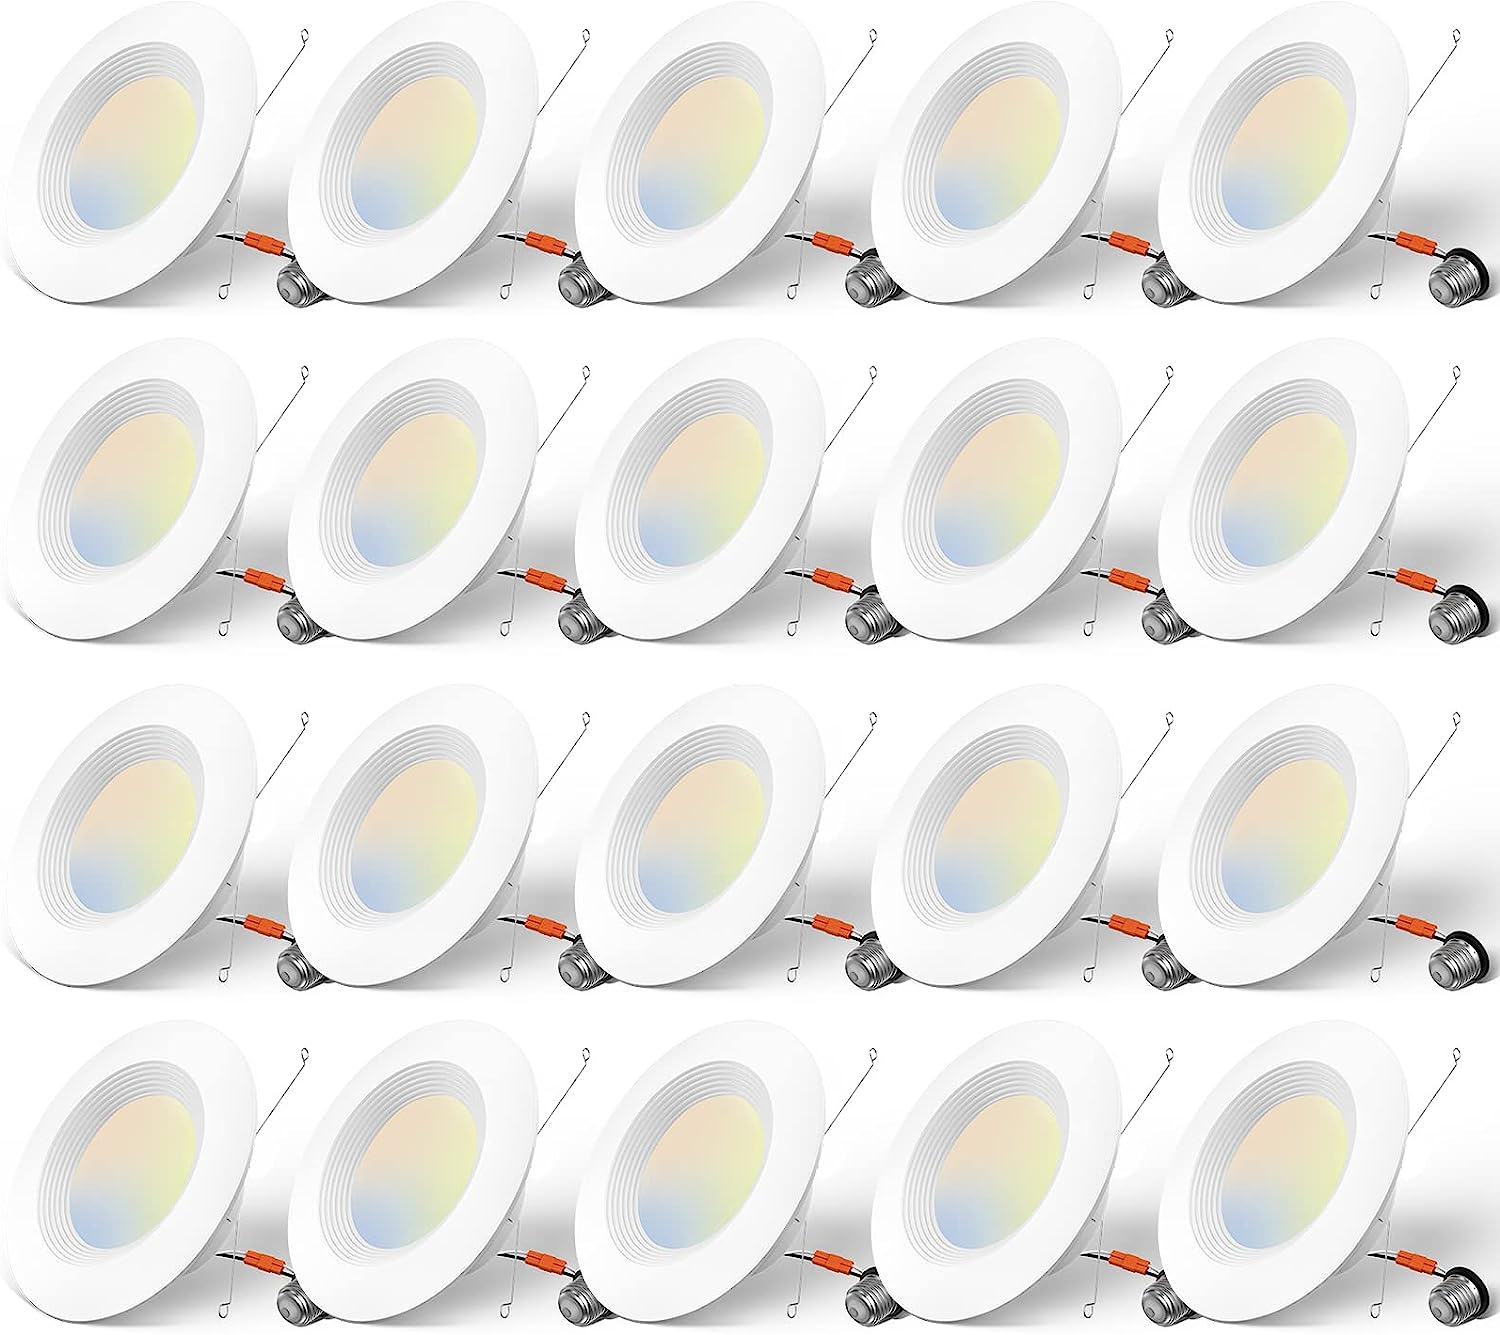 Amico 5/6 inch 5CCT LED Recessed Lighting 20 Pack, [...]